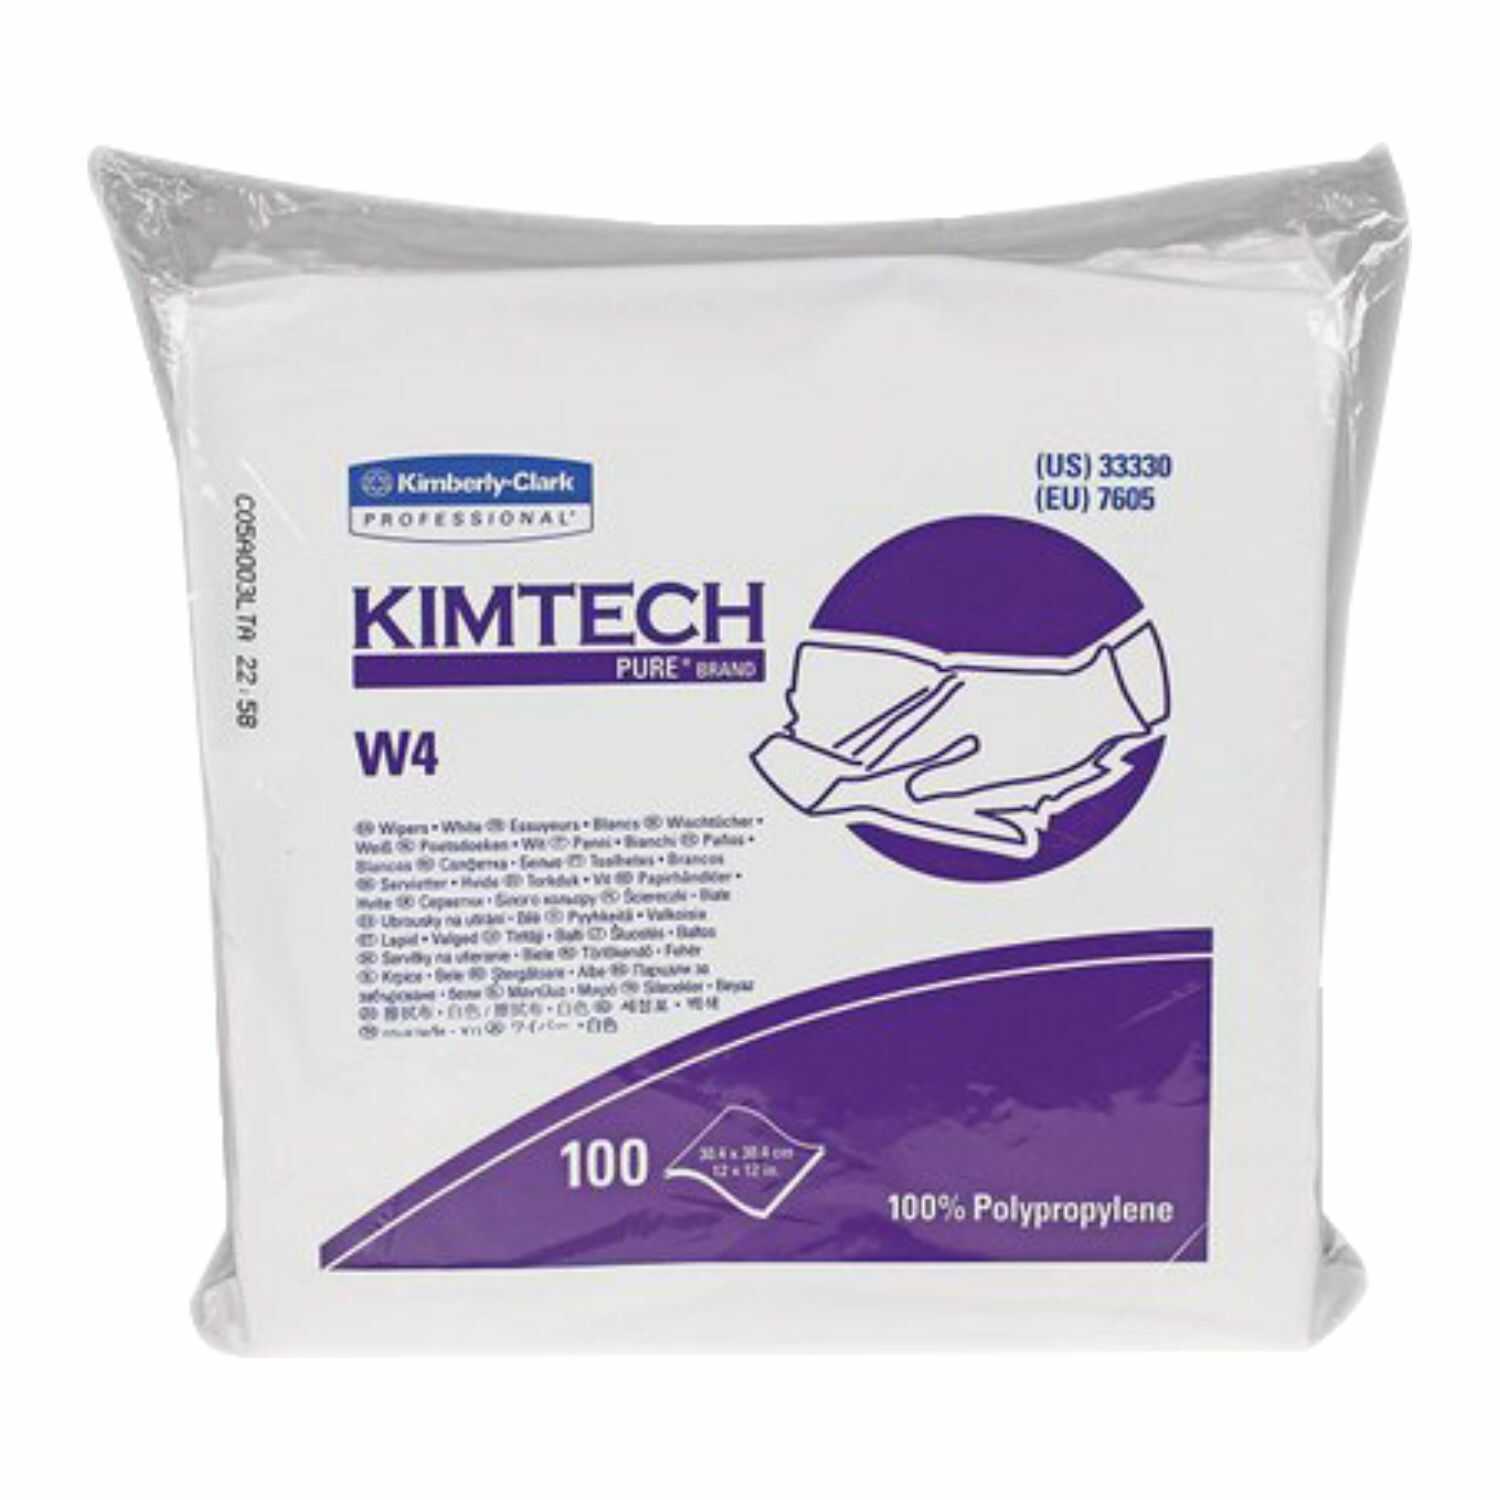 KIMTECH PURE* W4 Wipers/ Flat Sheet /White / 30.4 cm x 30.4 cm, 33330 (Pack of 5 )